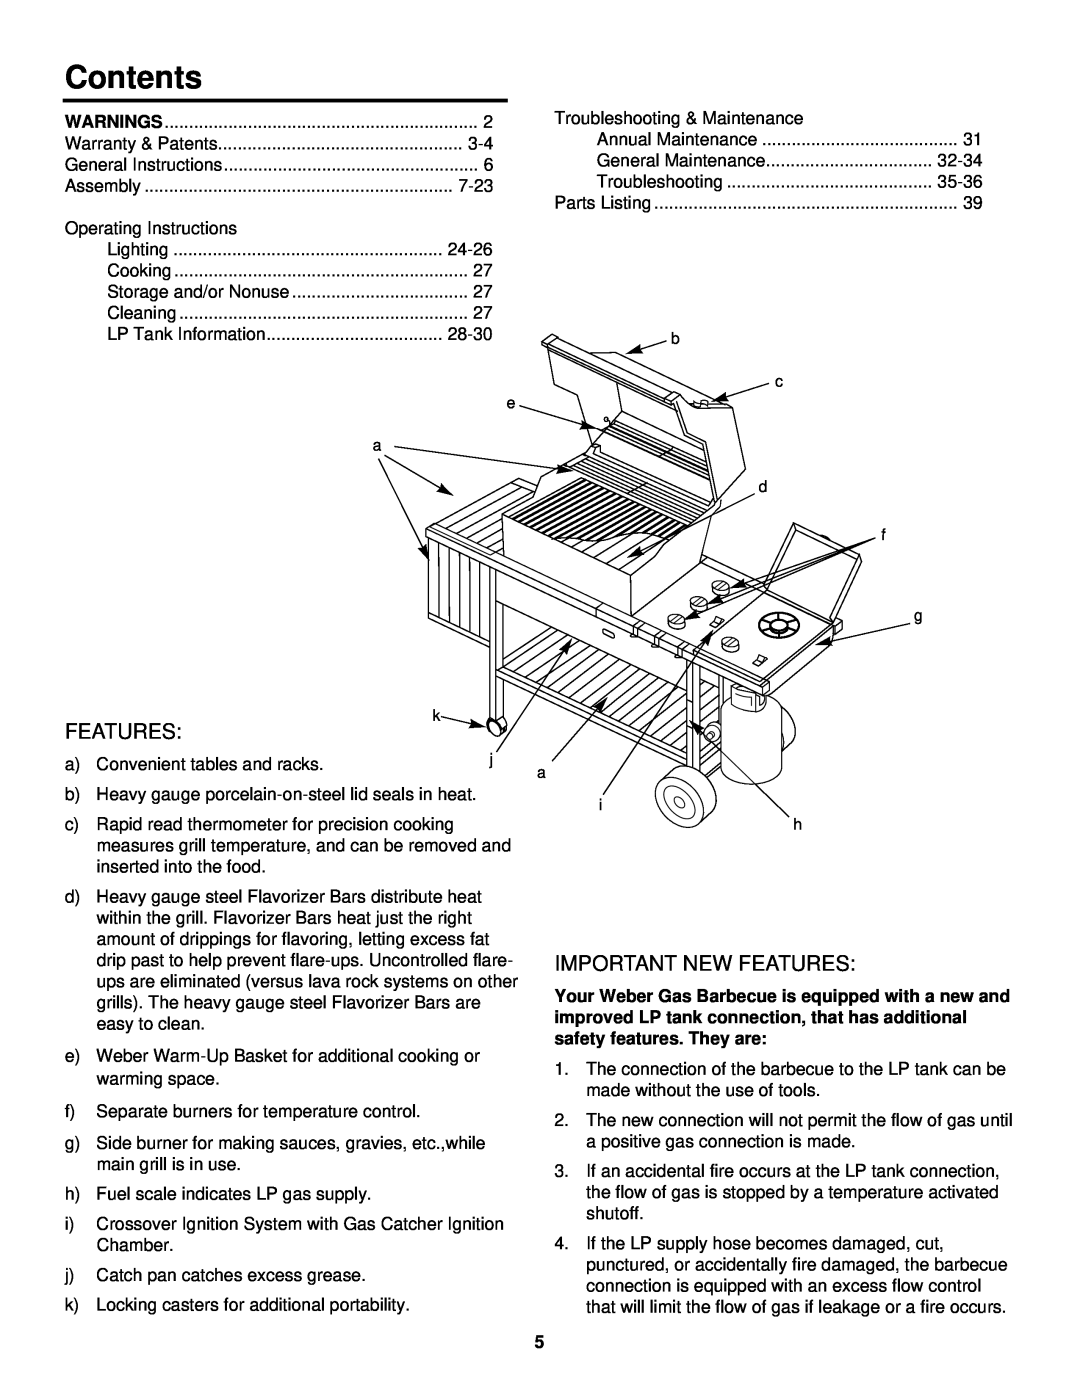 Weber 98642 owner manual Contents, Important New Features 